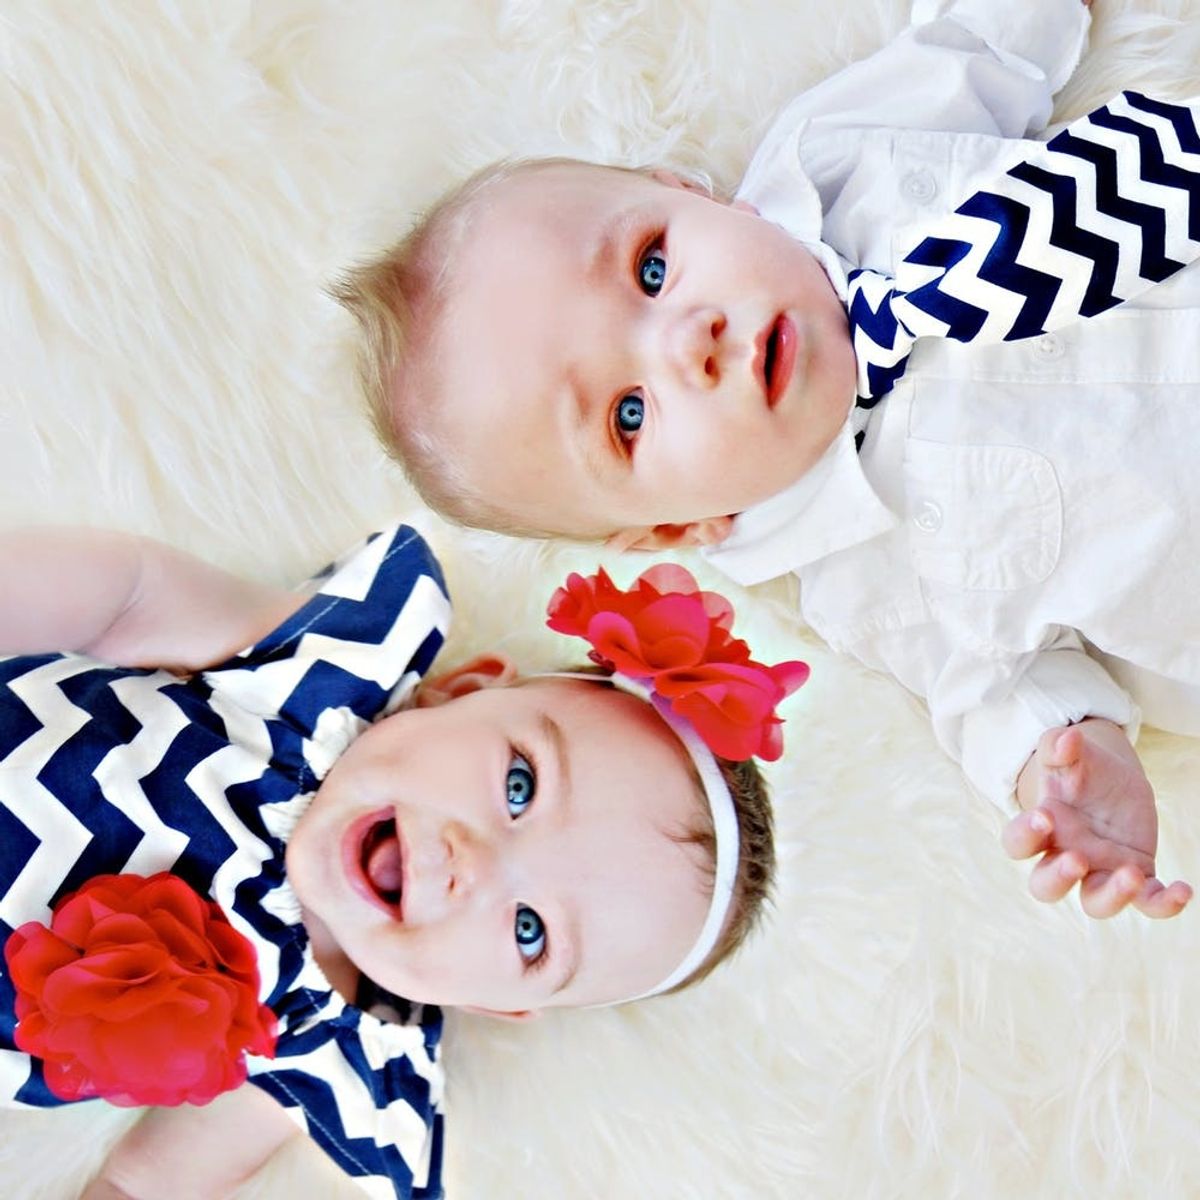 8 Things About Twins You Might Not Know